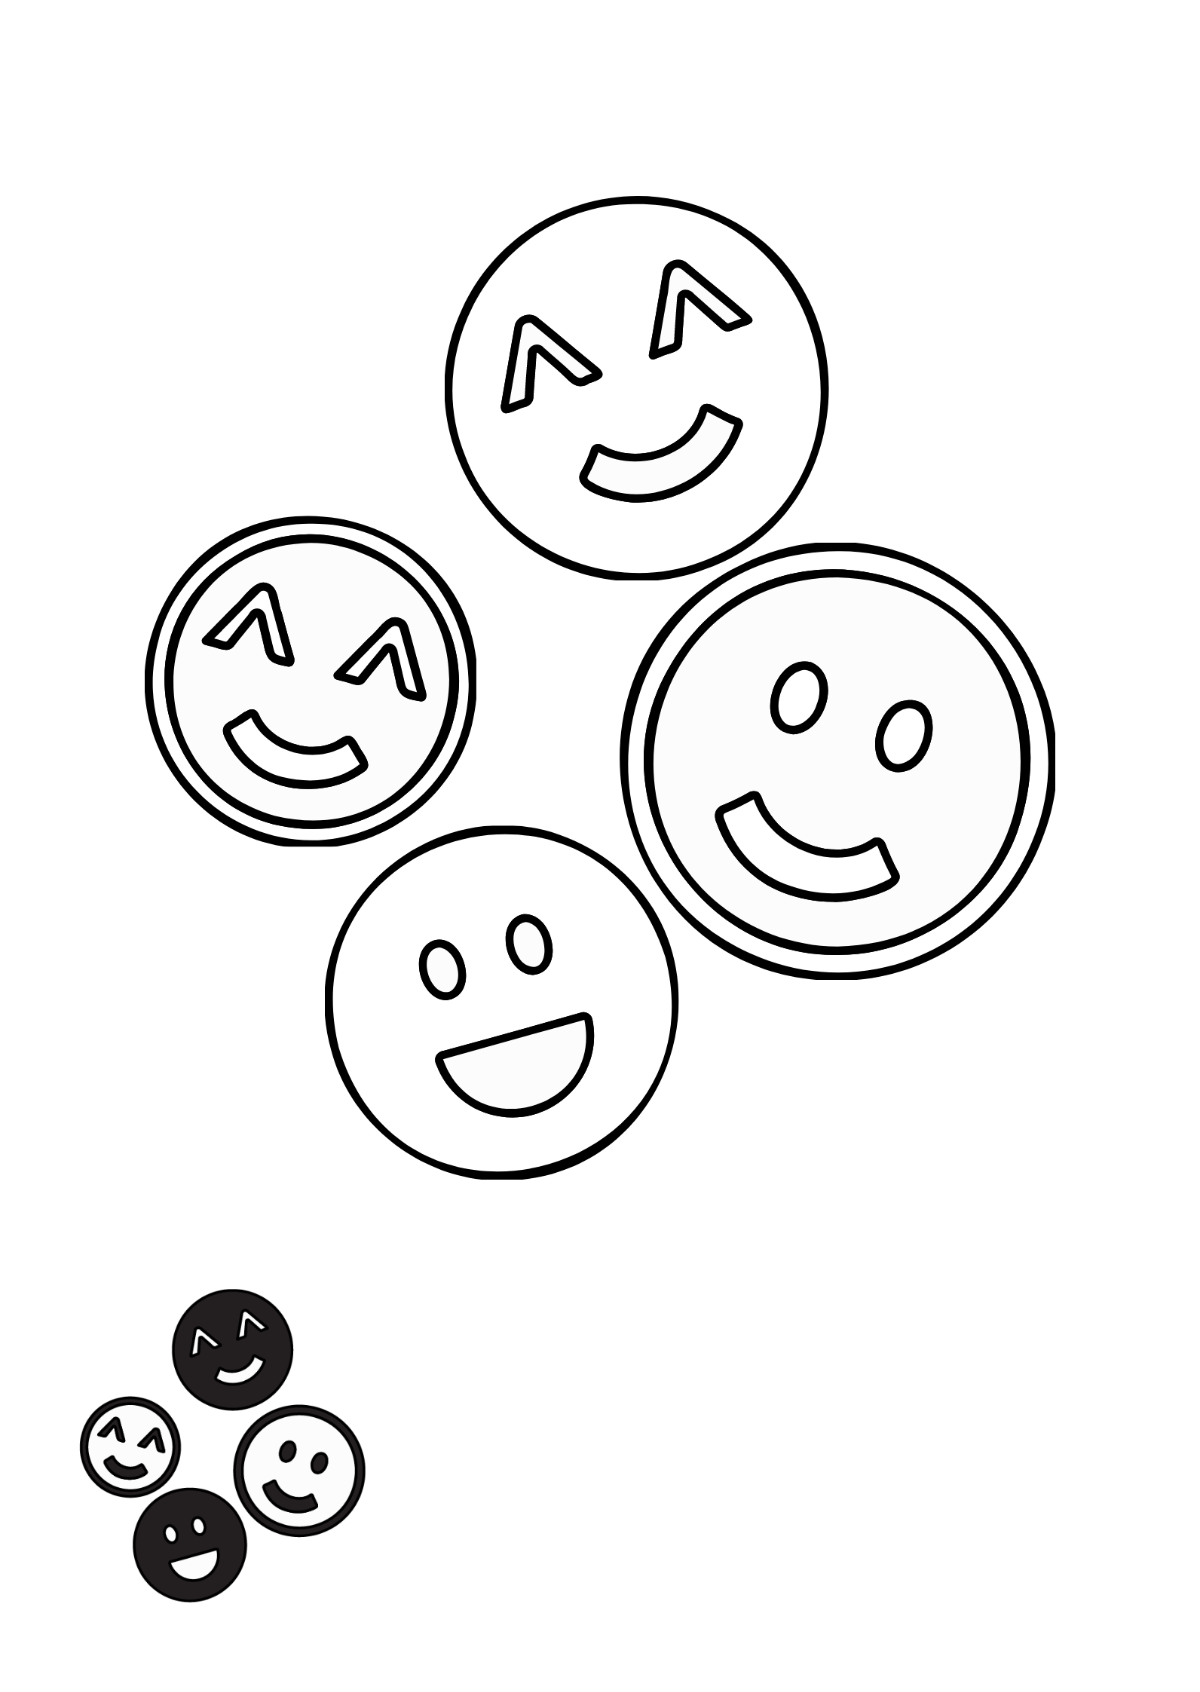 Free Black And White Smiley Face coloring page Template